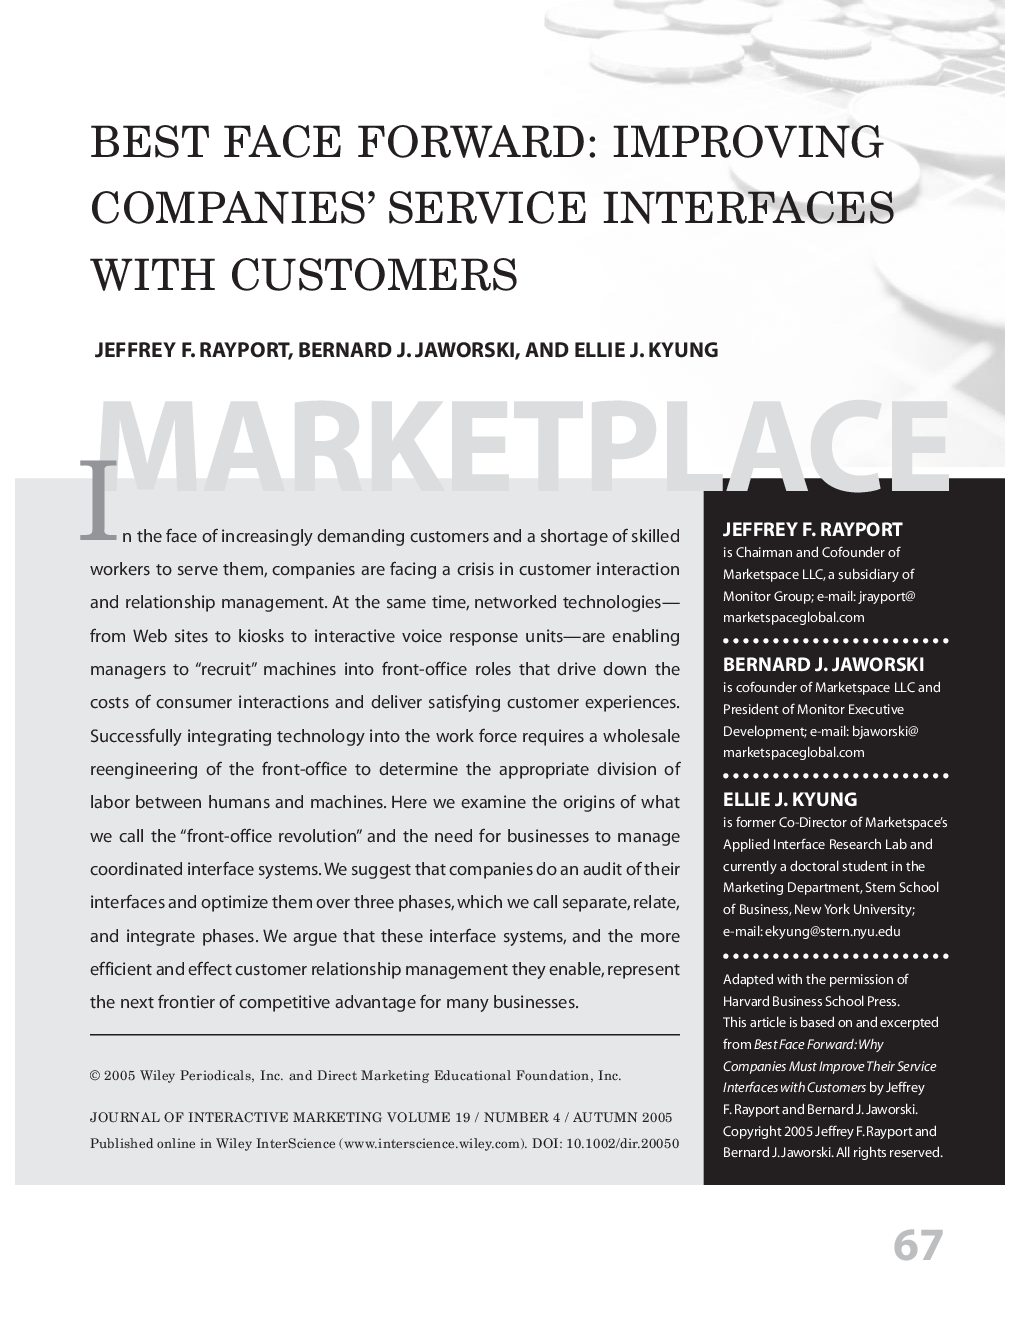 Best face forward: Improving companies' service interfaces with customers